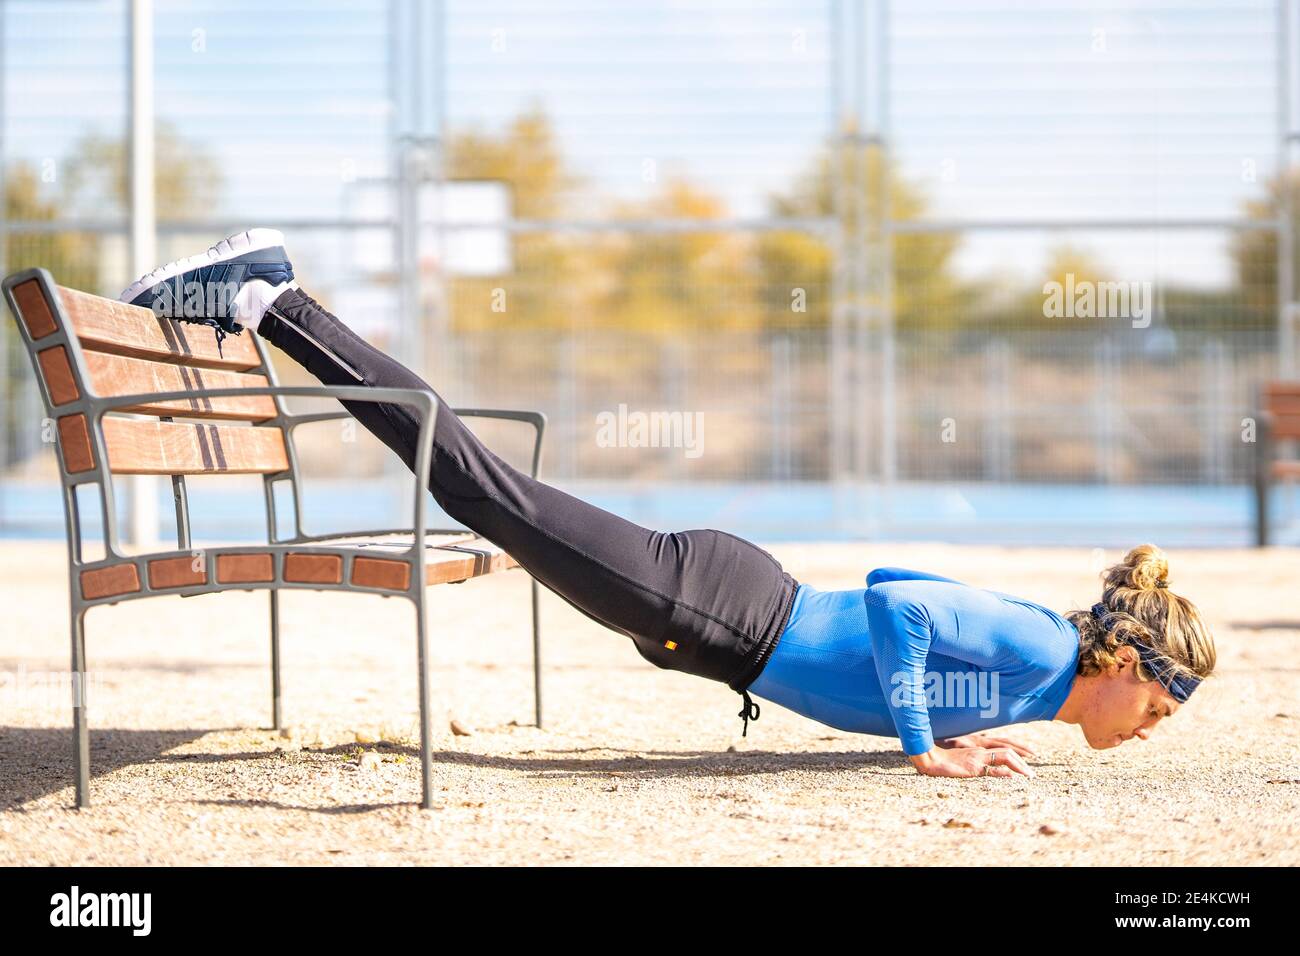 Male runner doing push ups with dedication on bench in public park on sunny day Stock Photo